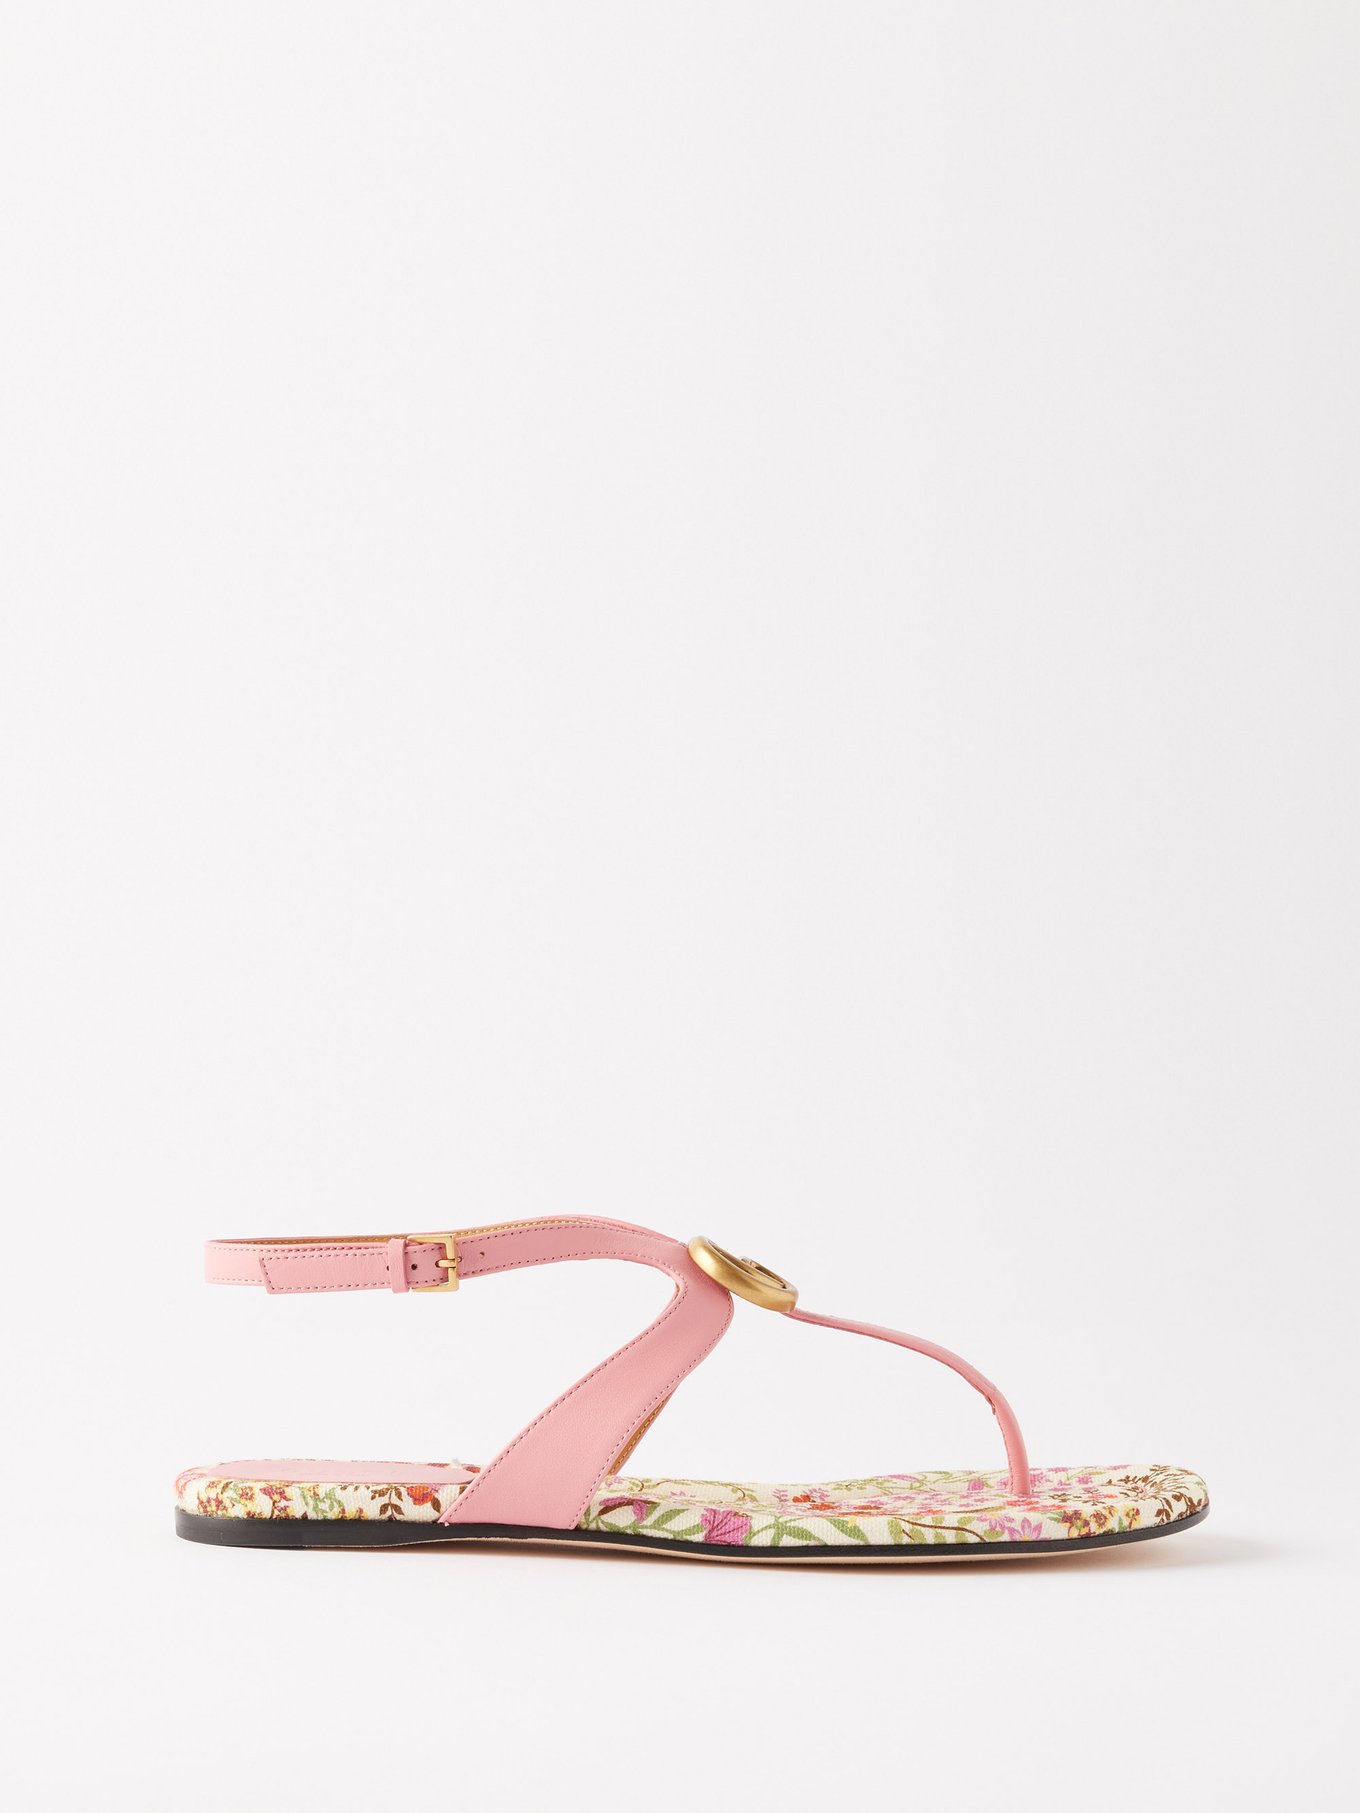 GG-logo floral-sole leather sandals | Gucci | US